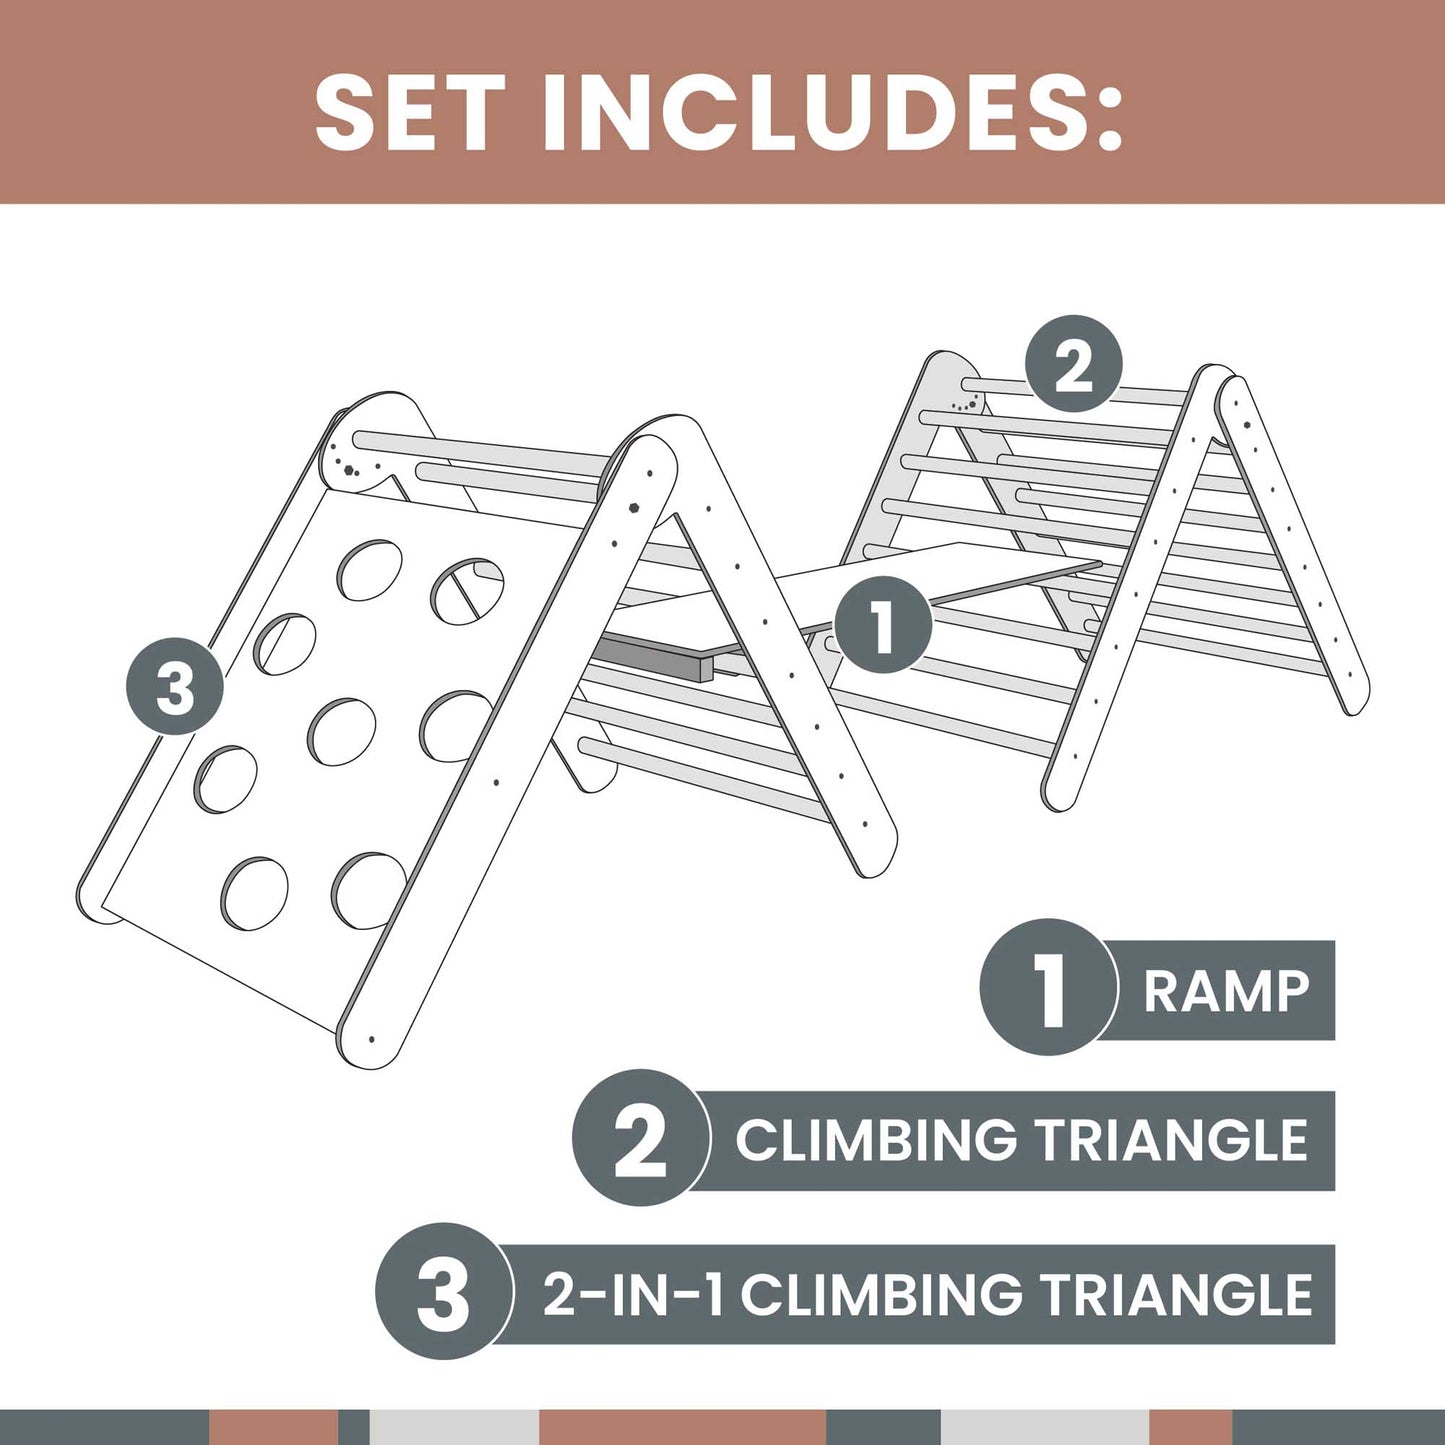 The set includes a Transformable climbing triangle + Foldable climbing triangle + a ramp and a climbing ladder.